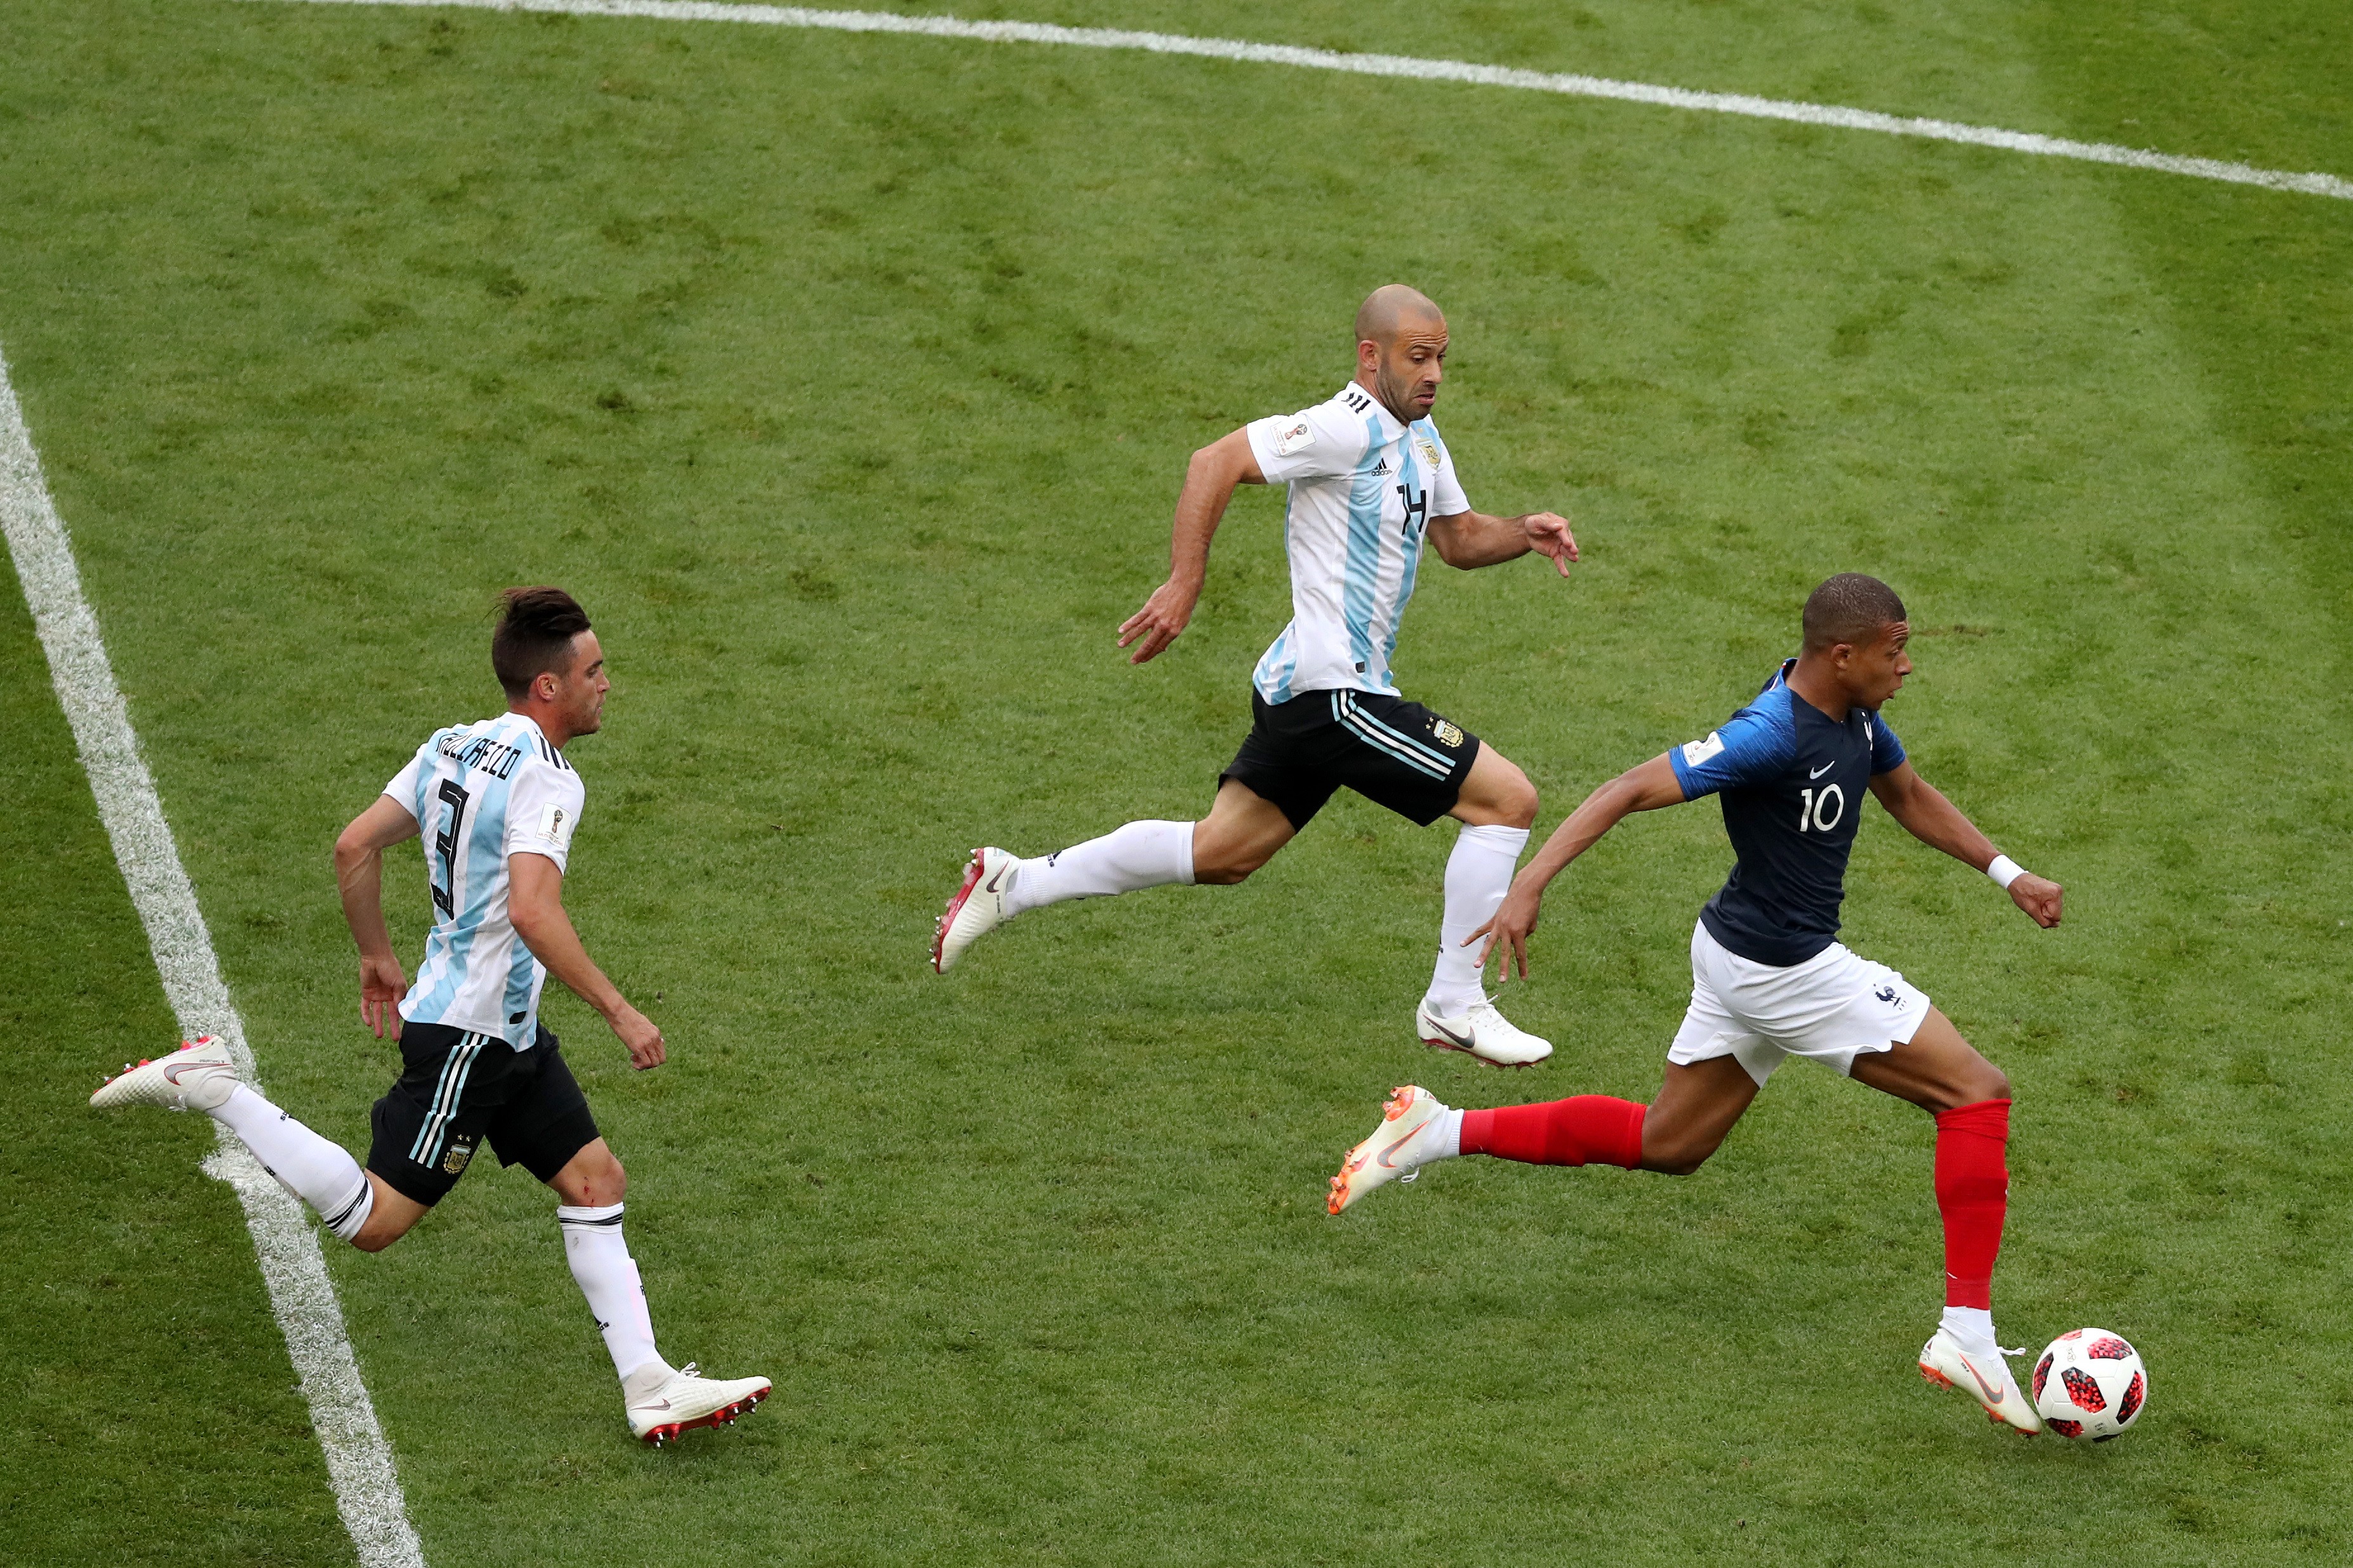 KAZAN, RUSSIA - JUNE 30:  Kylian Mbappe of France is chased by Javier Mascherano anf Nicolas Tagliafico of Argentina during the 2018 FIFA World Cup Russia Round of 16 match between France and Argentina at Kazan Arena on June 30, 2018 in Kazan, Russia.  (P (Foto: Getty Images)